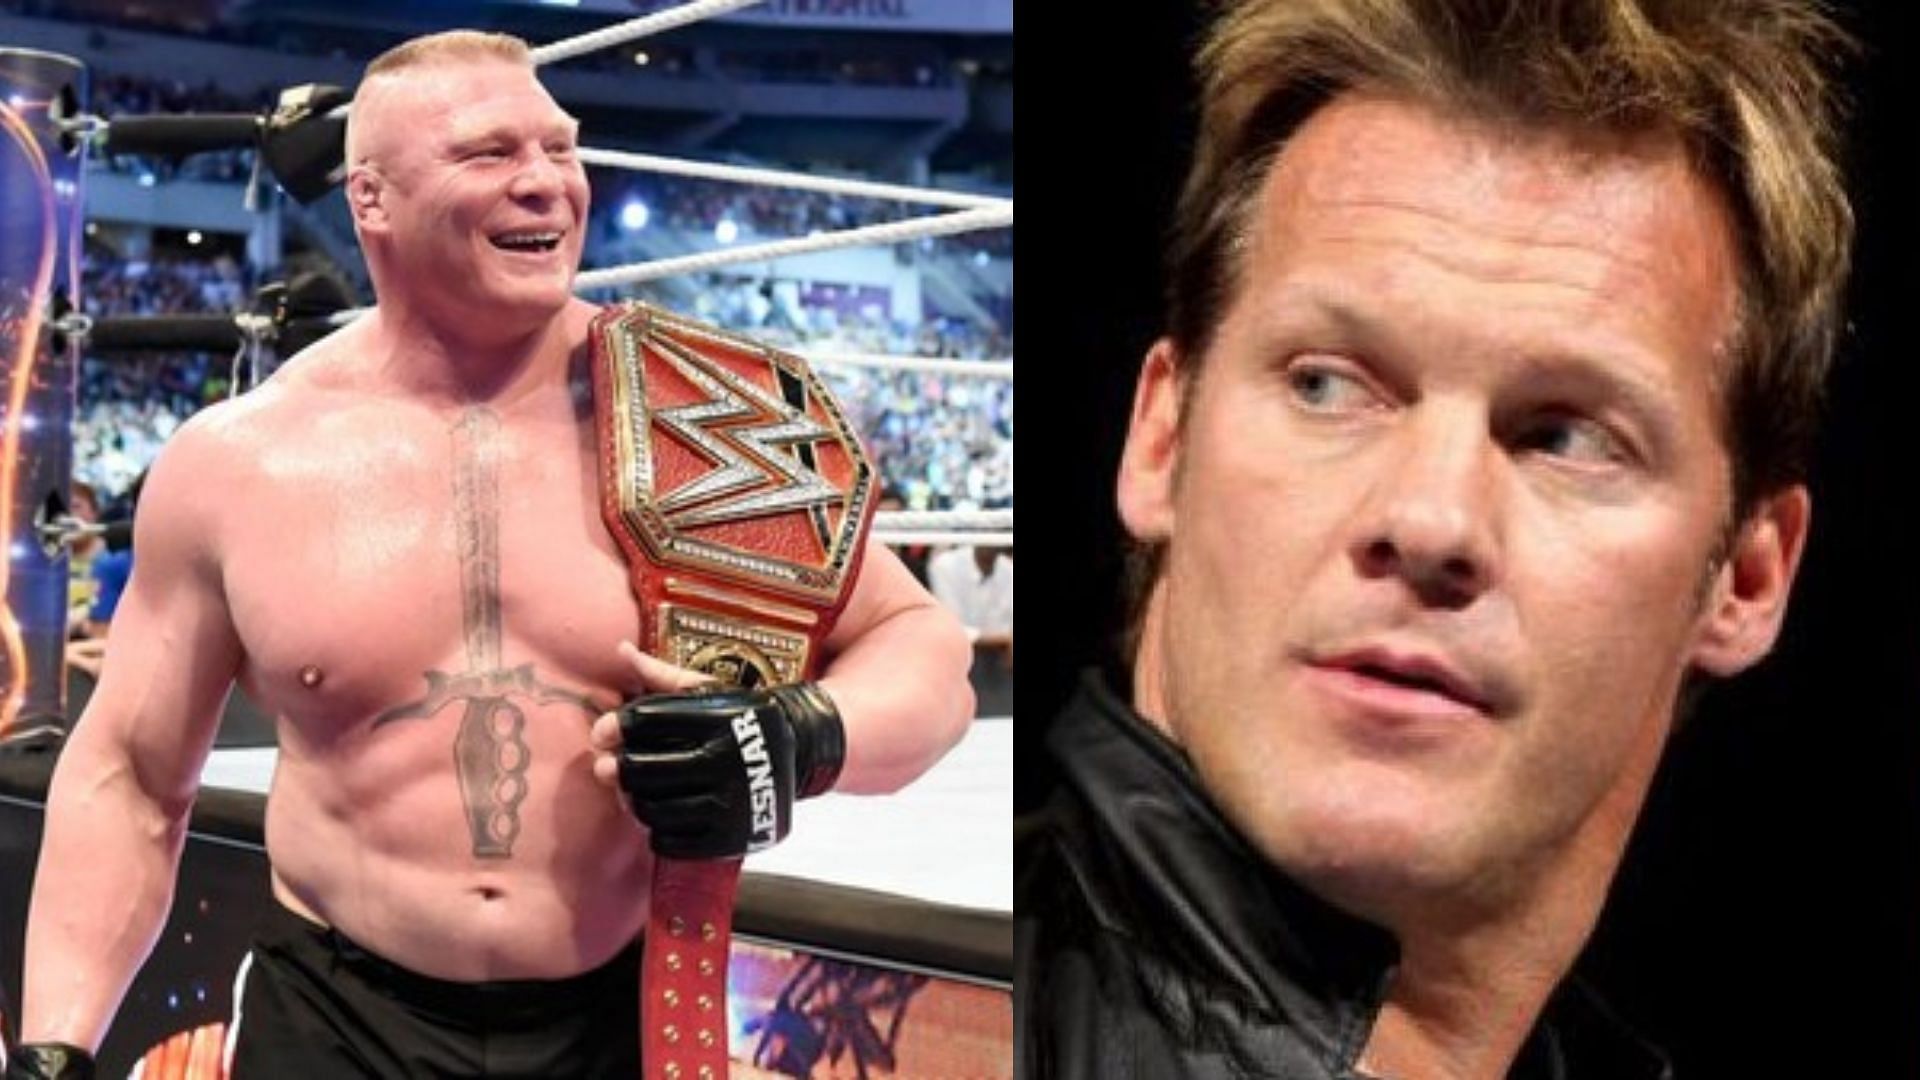 There were plans to have Chris Jericho face Brock Lesnar at WWE Payback 2017